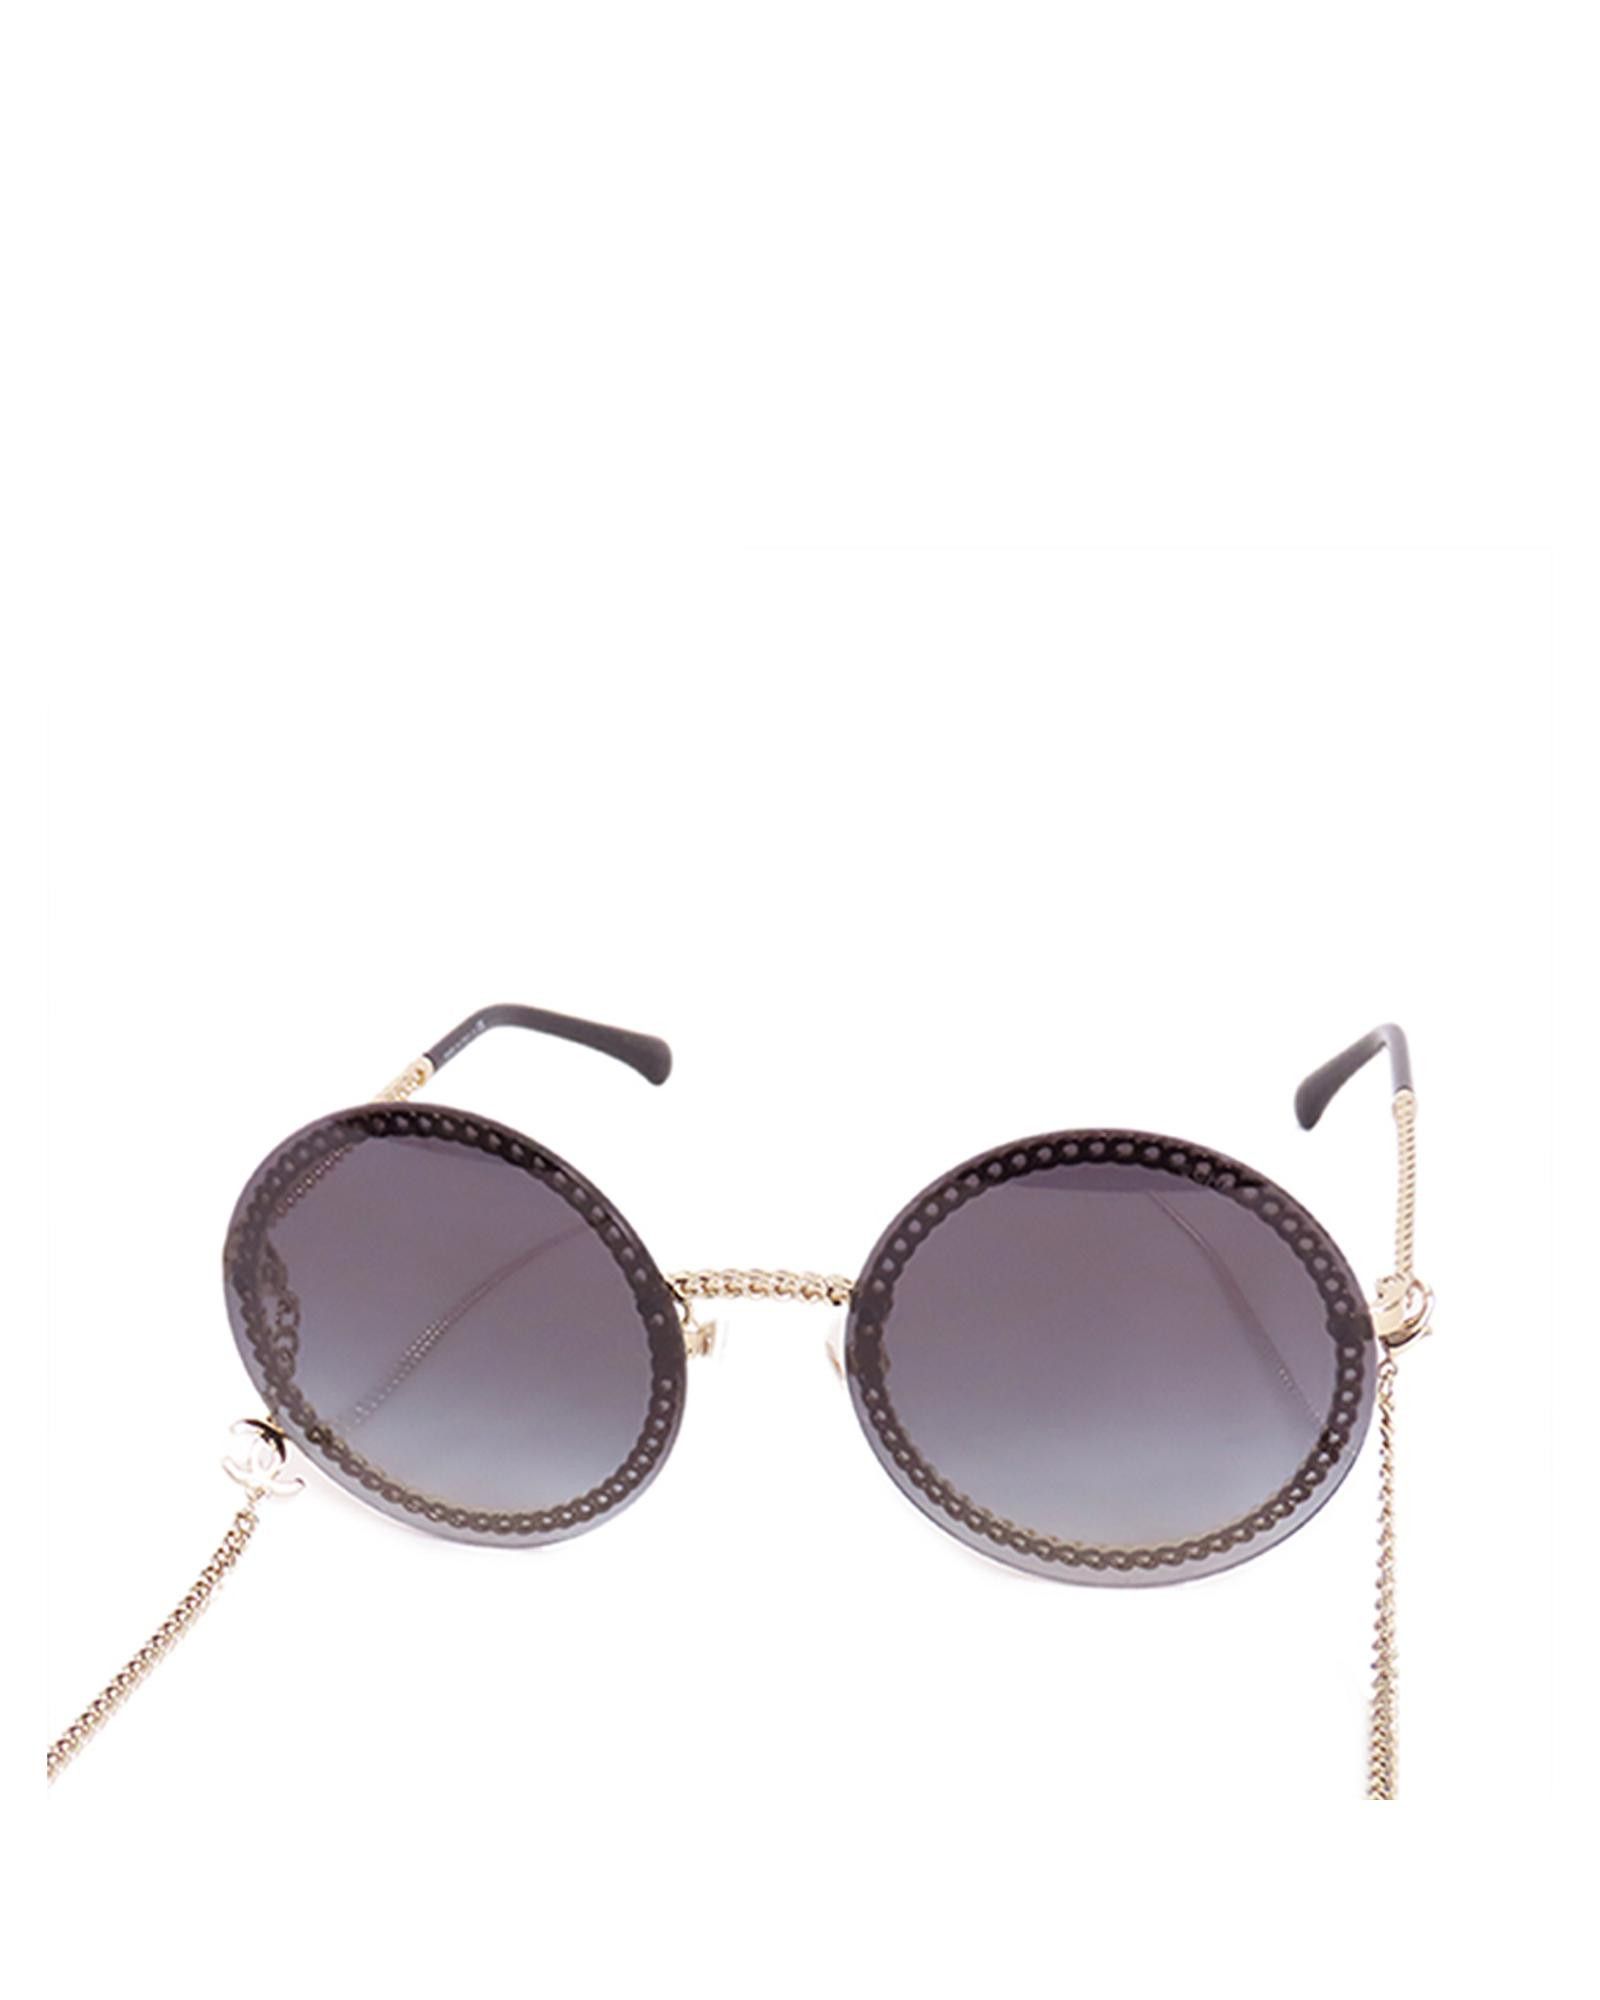 CHANEL Round Sunglasses for Women for sale